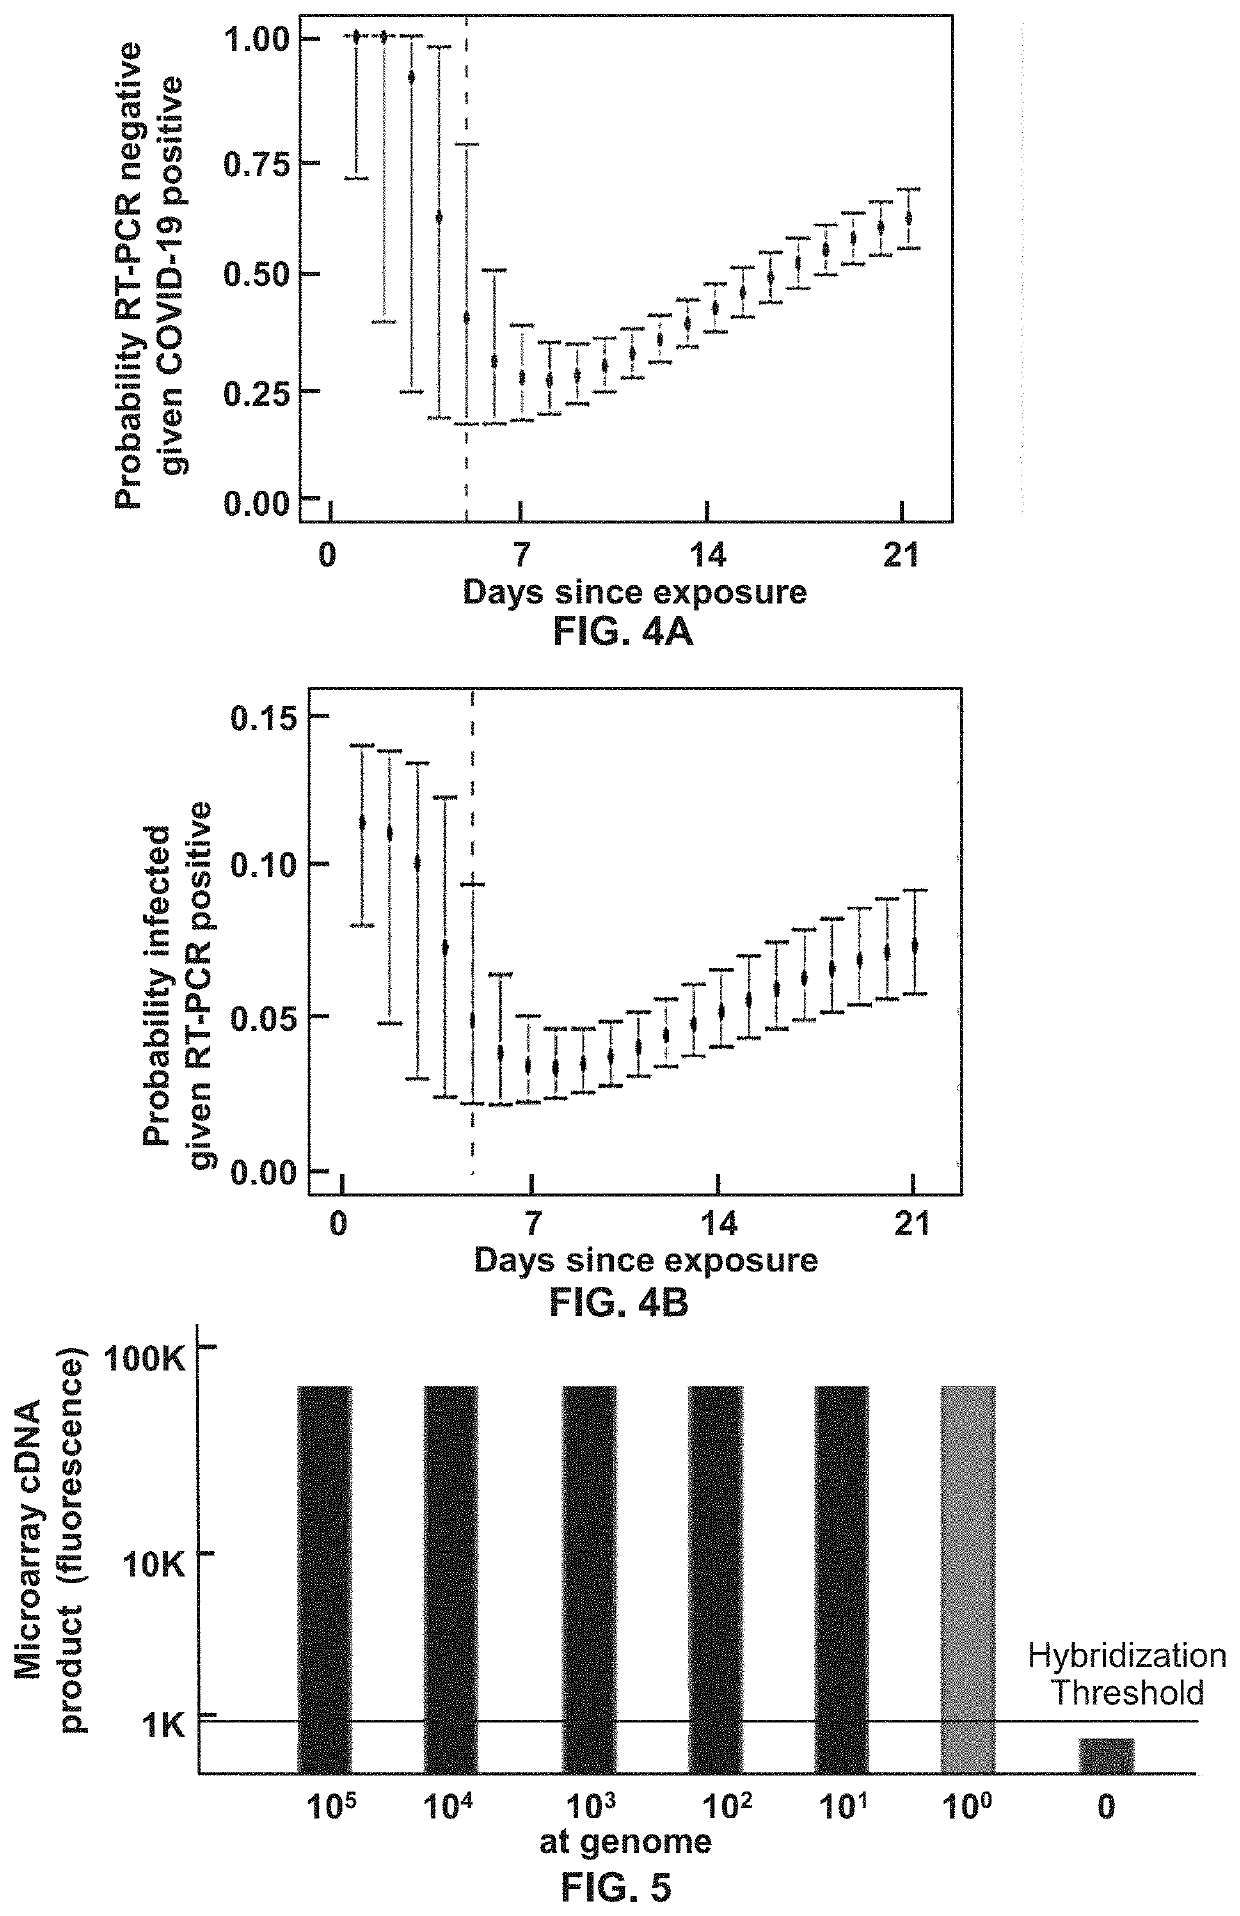 Methods for Detecting Low Levels of Covid-19 Virus